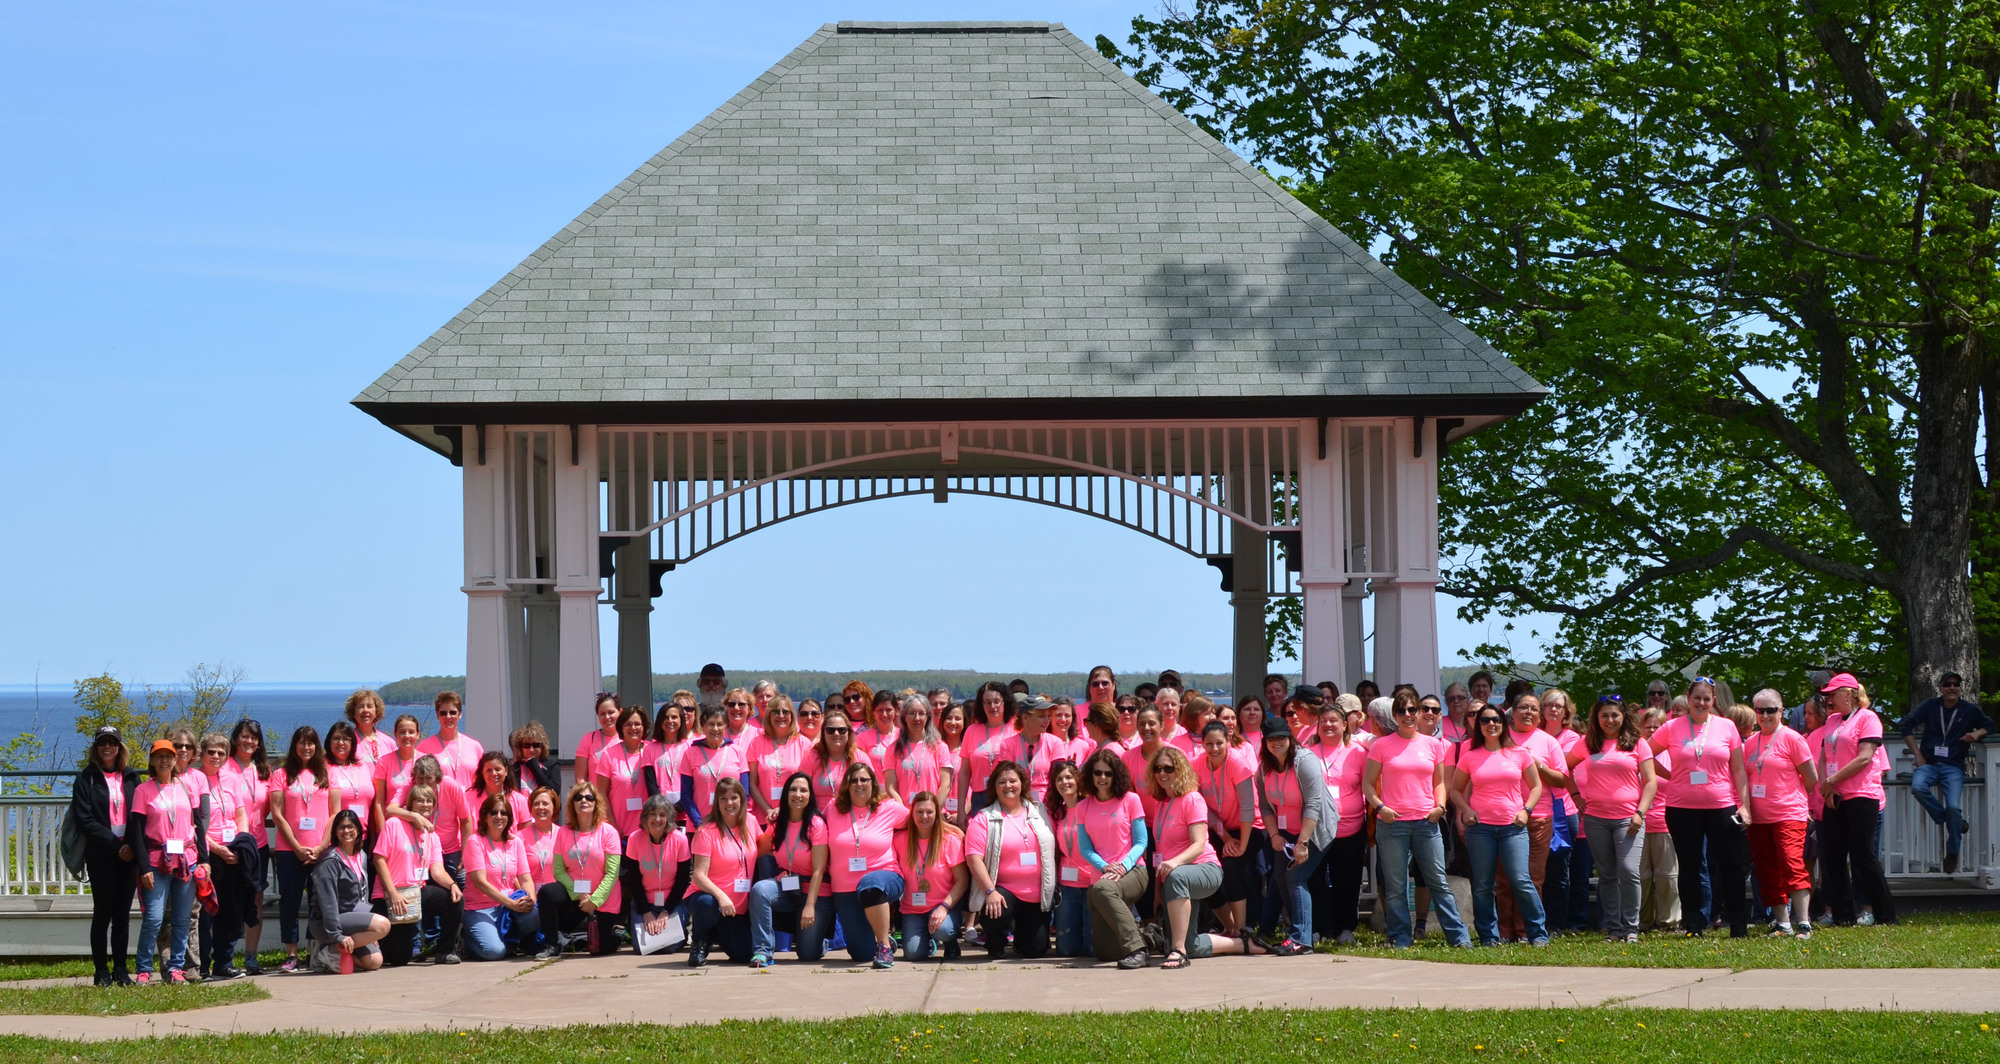 The June 2017 participants pose for a photo to commemorate the 20th anniversary of the Becoming an Outdoors Woman program in Upper Michigan. 